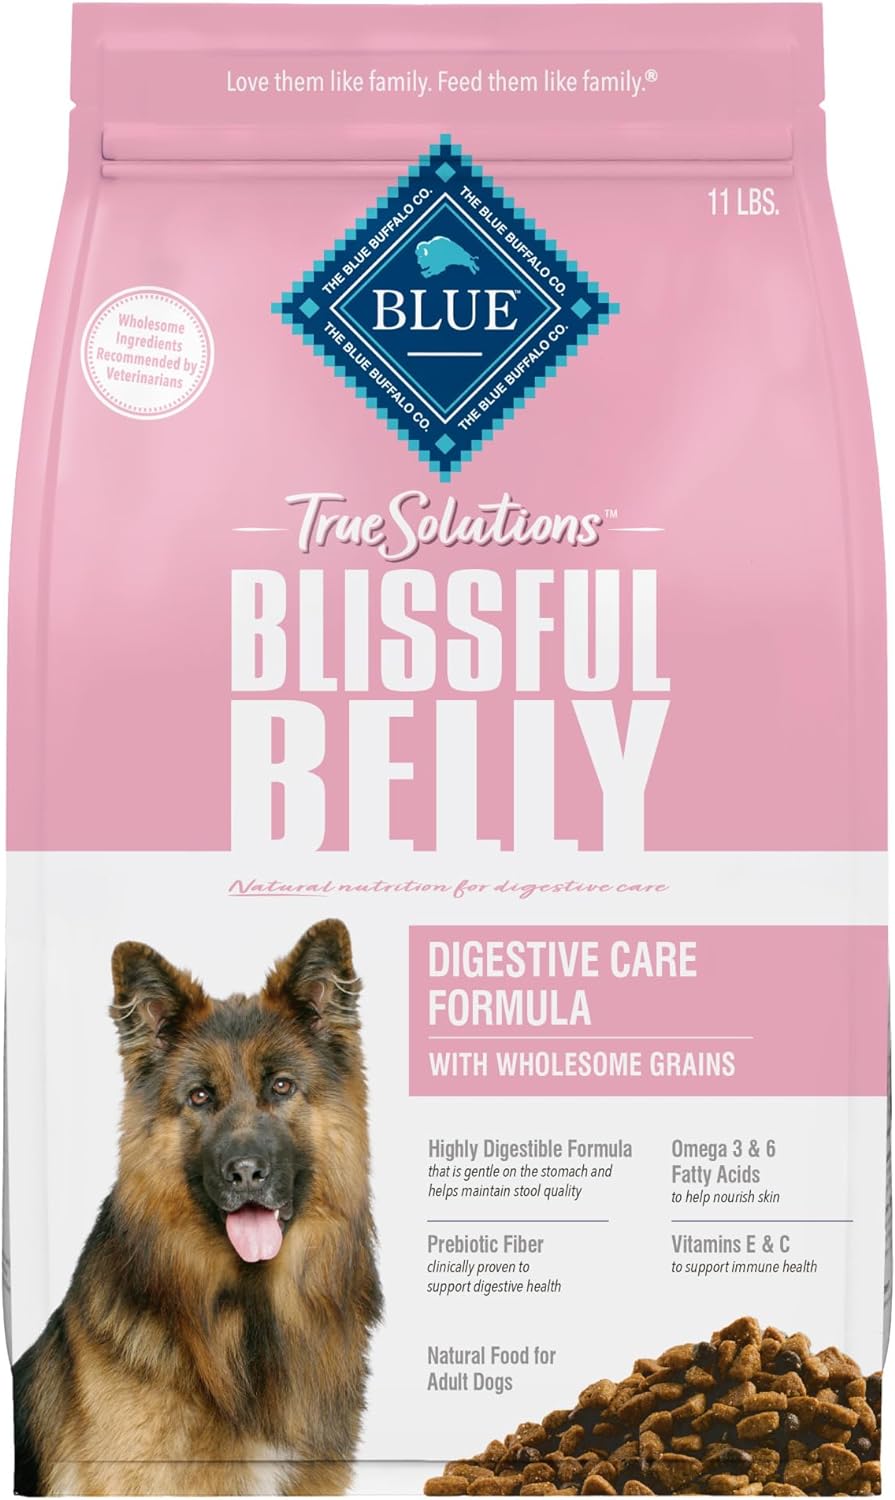 Blue Buffalo True Solutions Blissful Belly Adult Dry Dog Food, Digestive Care Formula, Helps Maintain Stool Quality, Made in the USA with Natural Ingredients, Chicken, 11-lb. Bag